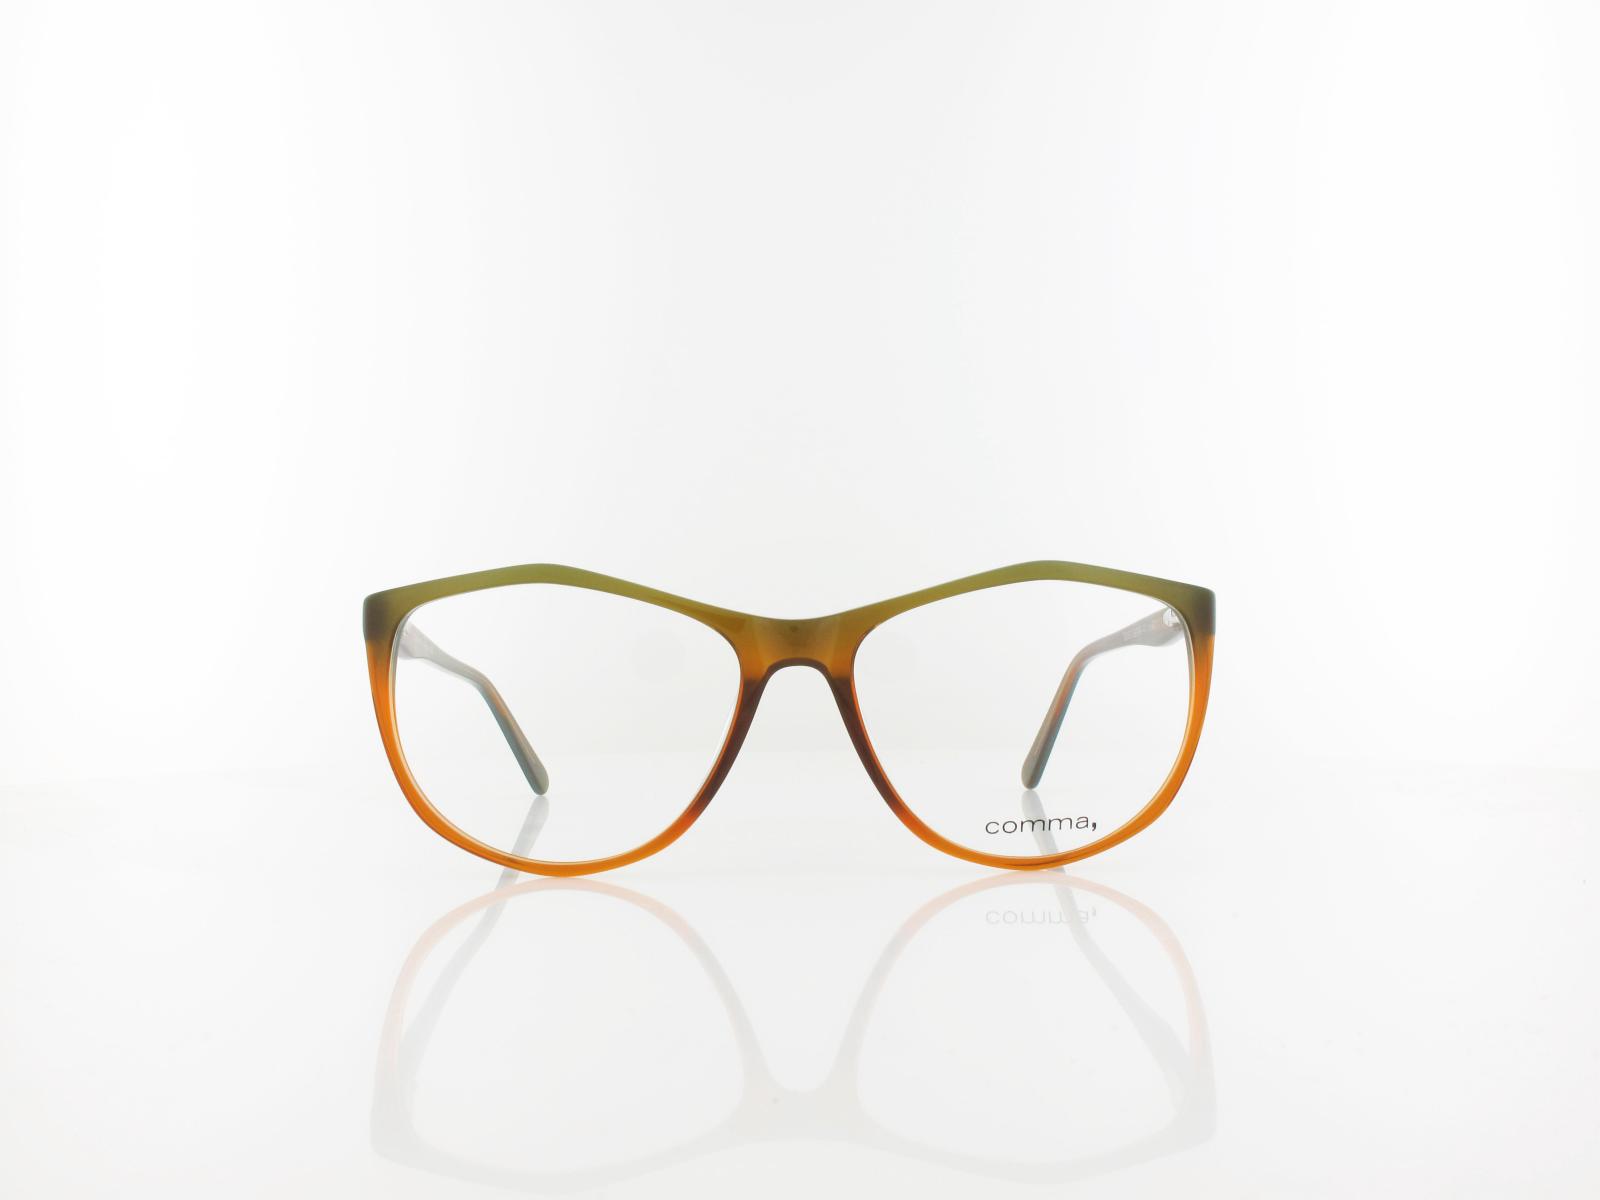 Comma | 70067 50 55 | brown green transparent